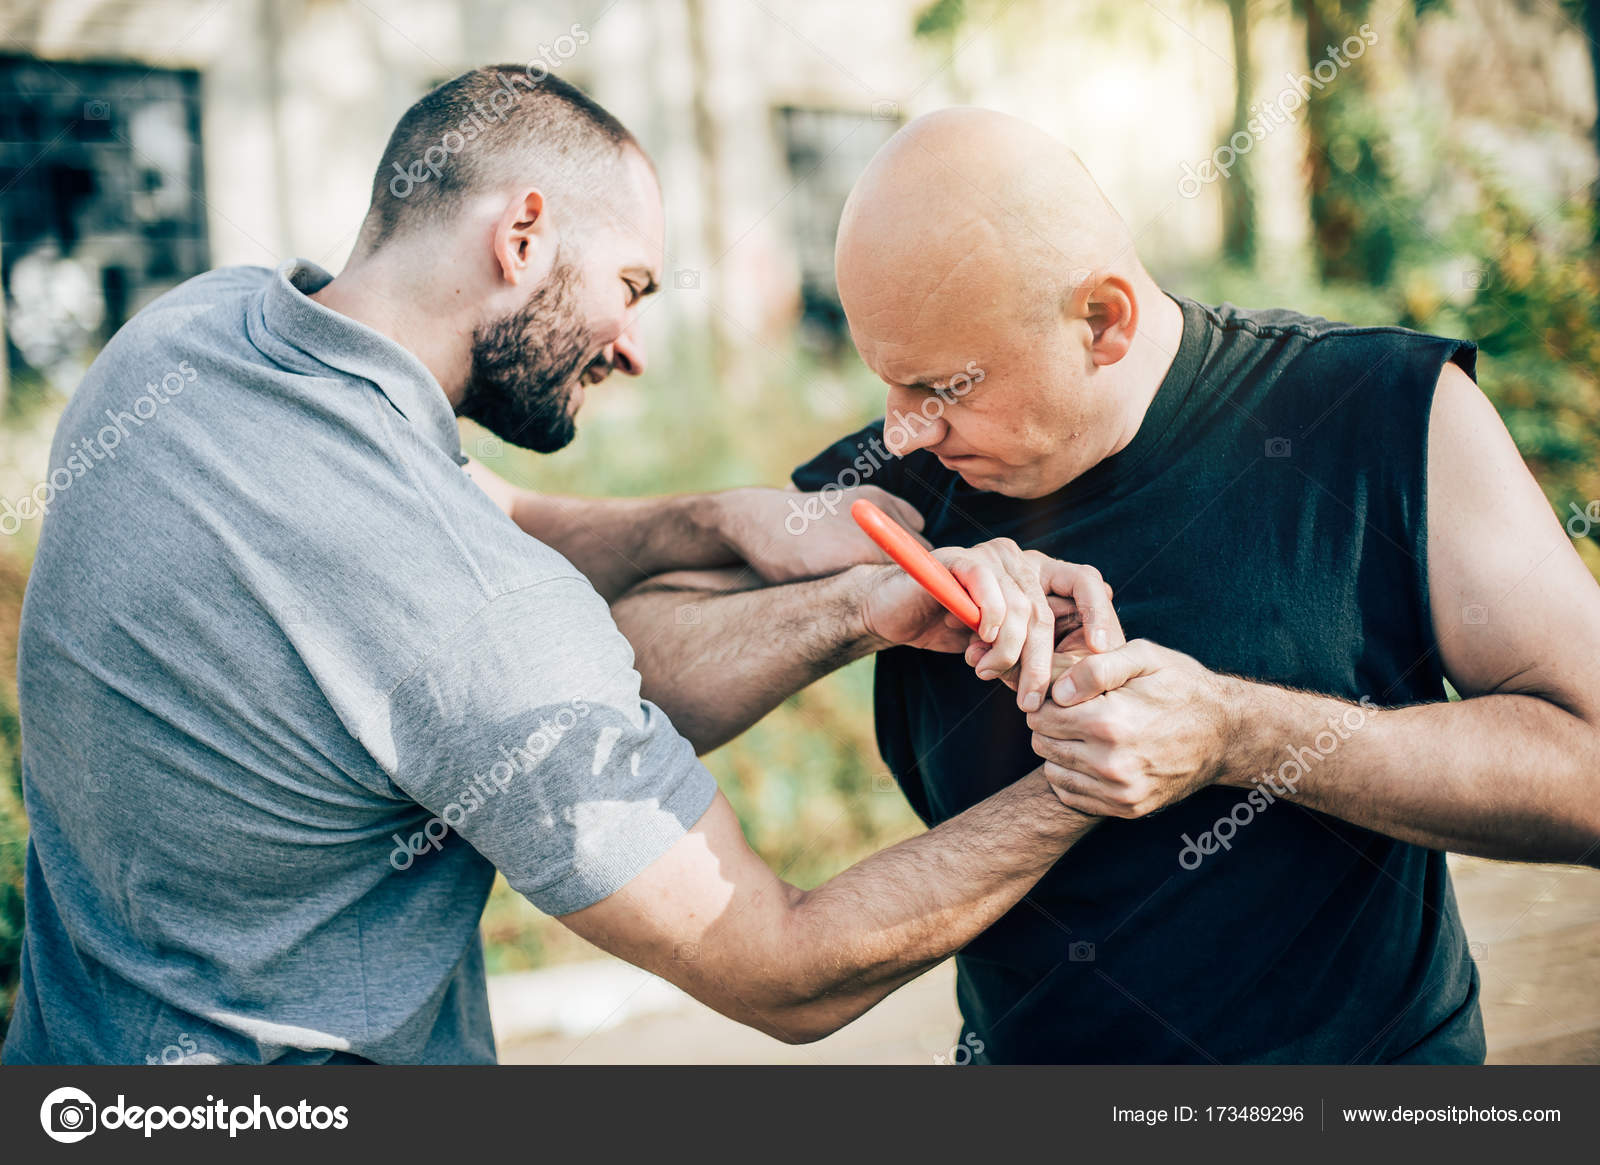 Self Defense Disarming Technique Against Threat And Knife Attack Stock Photo By C Guruxox